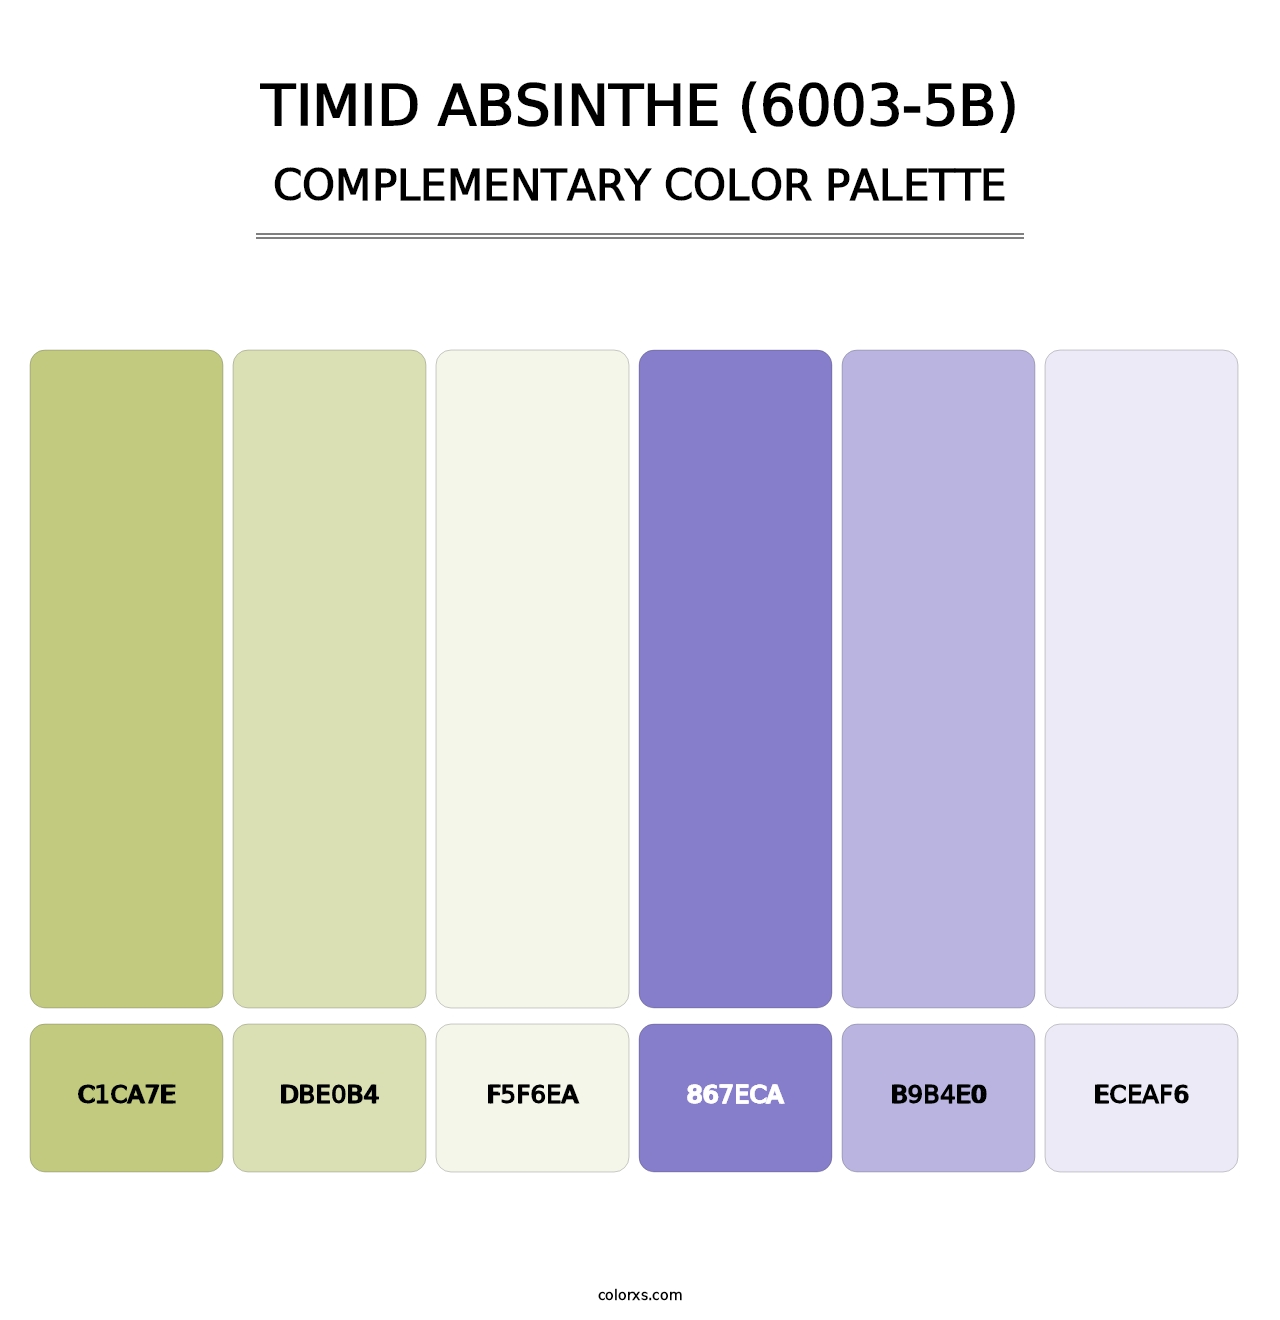 Timid Absinthe (6003-5B) - Complementary Color Palette